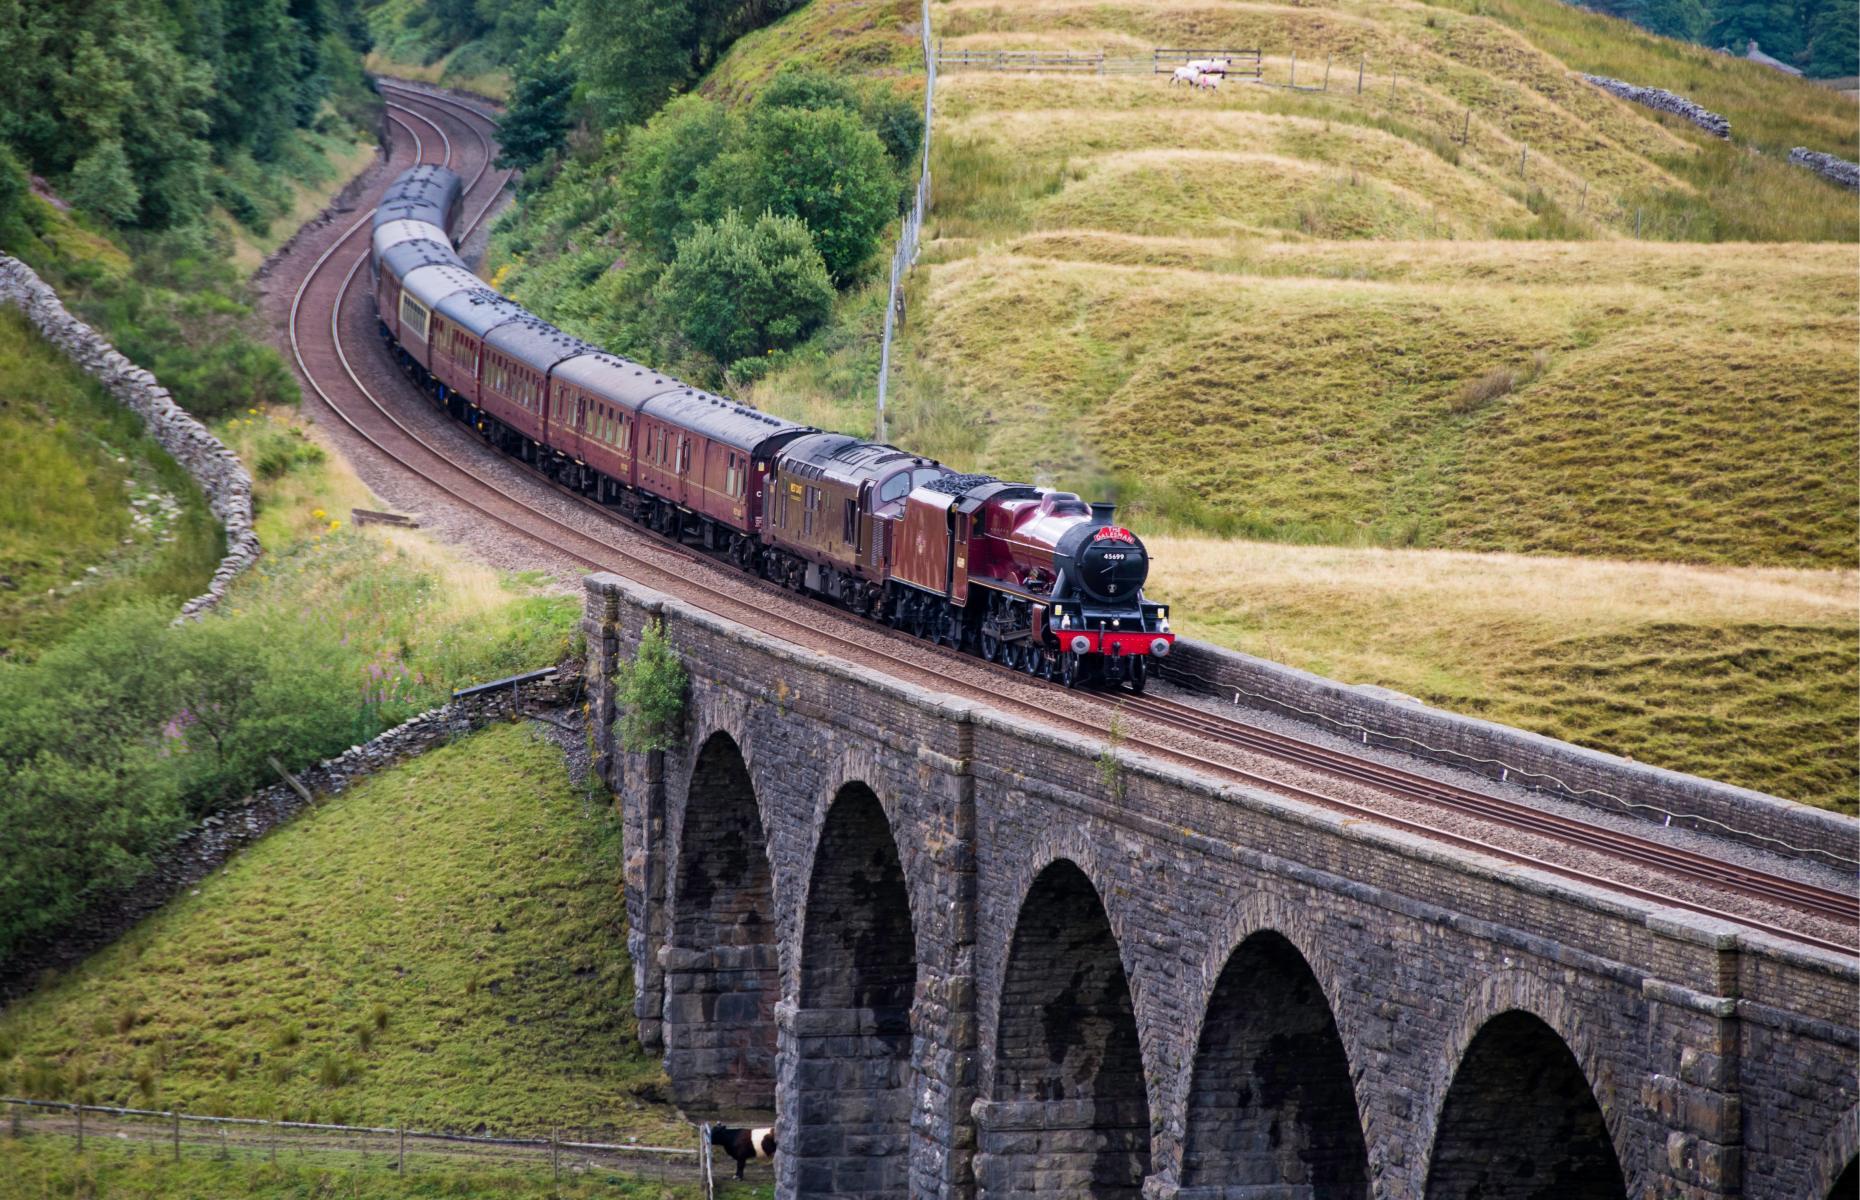 <p>Dubbed one of the world’s greatest railway journeys, the <a href="https://settle-carlisle.co.uk/">Settle-Carlisle</a> line serves as a lasting monument to incredible Victorian engineering. Completed in 1875, the 73-mile (117.5km) long railway was built almost entirely by hand and took seven years to construct. The heritage line travels from the Yorkshire Dales to Cumbria through some of England’s finest countryside. One of the prettiest spots is when the train crosses the famous Ribblehead Viaduct which looms over the Yorkshire landscape.</p>  <p><a href="https://www.loveexploring.com/gallerylist/104035/the-uks-most-beautiful-bridges"><strong>Discover the UK’s most beautiful bridges</strong></a></p>